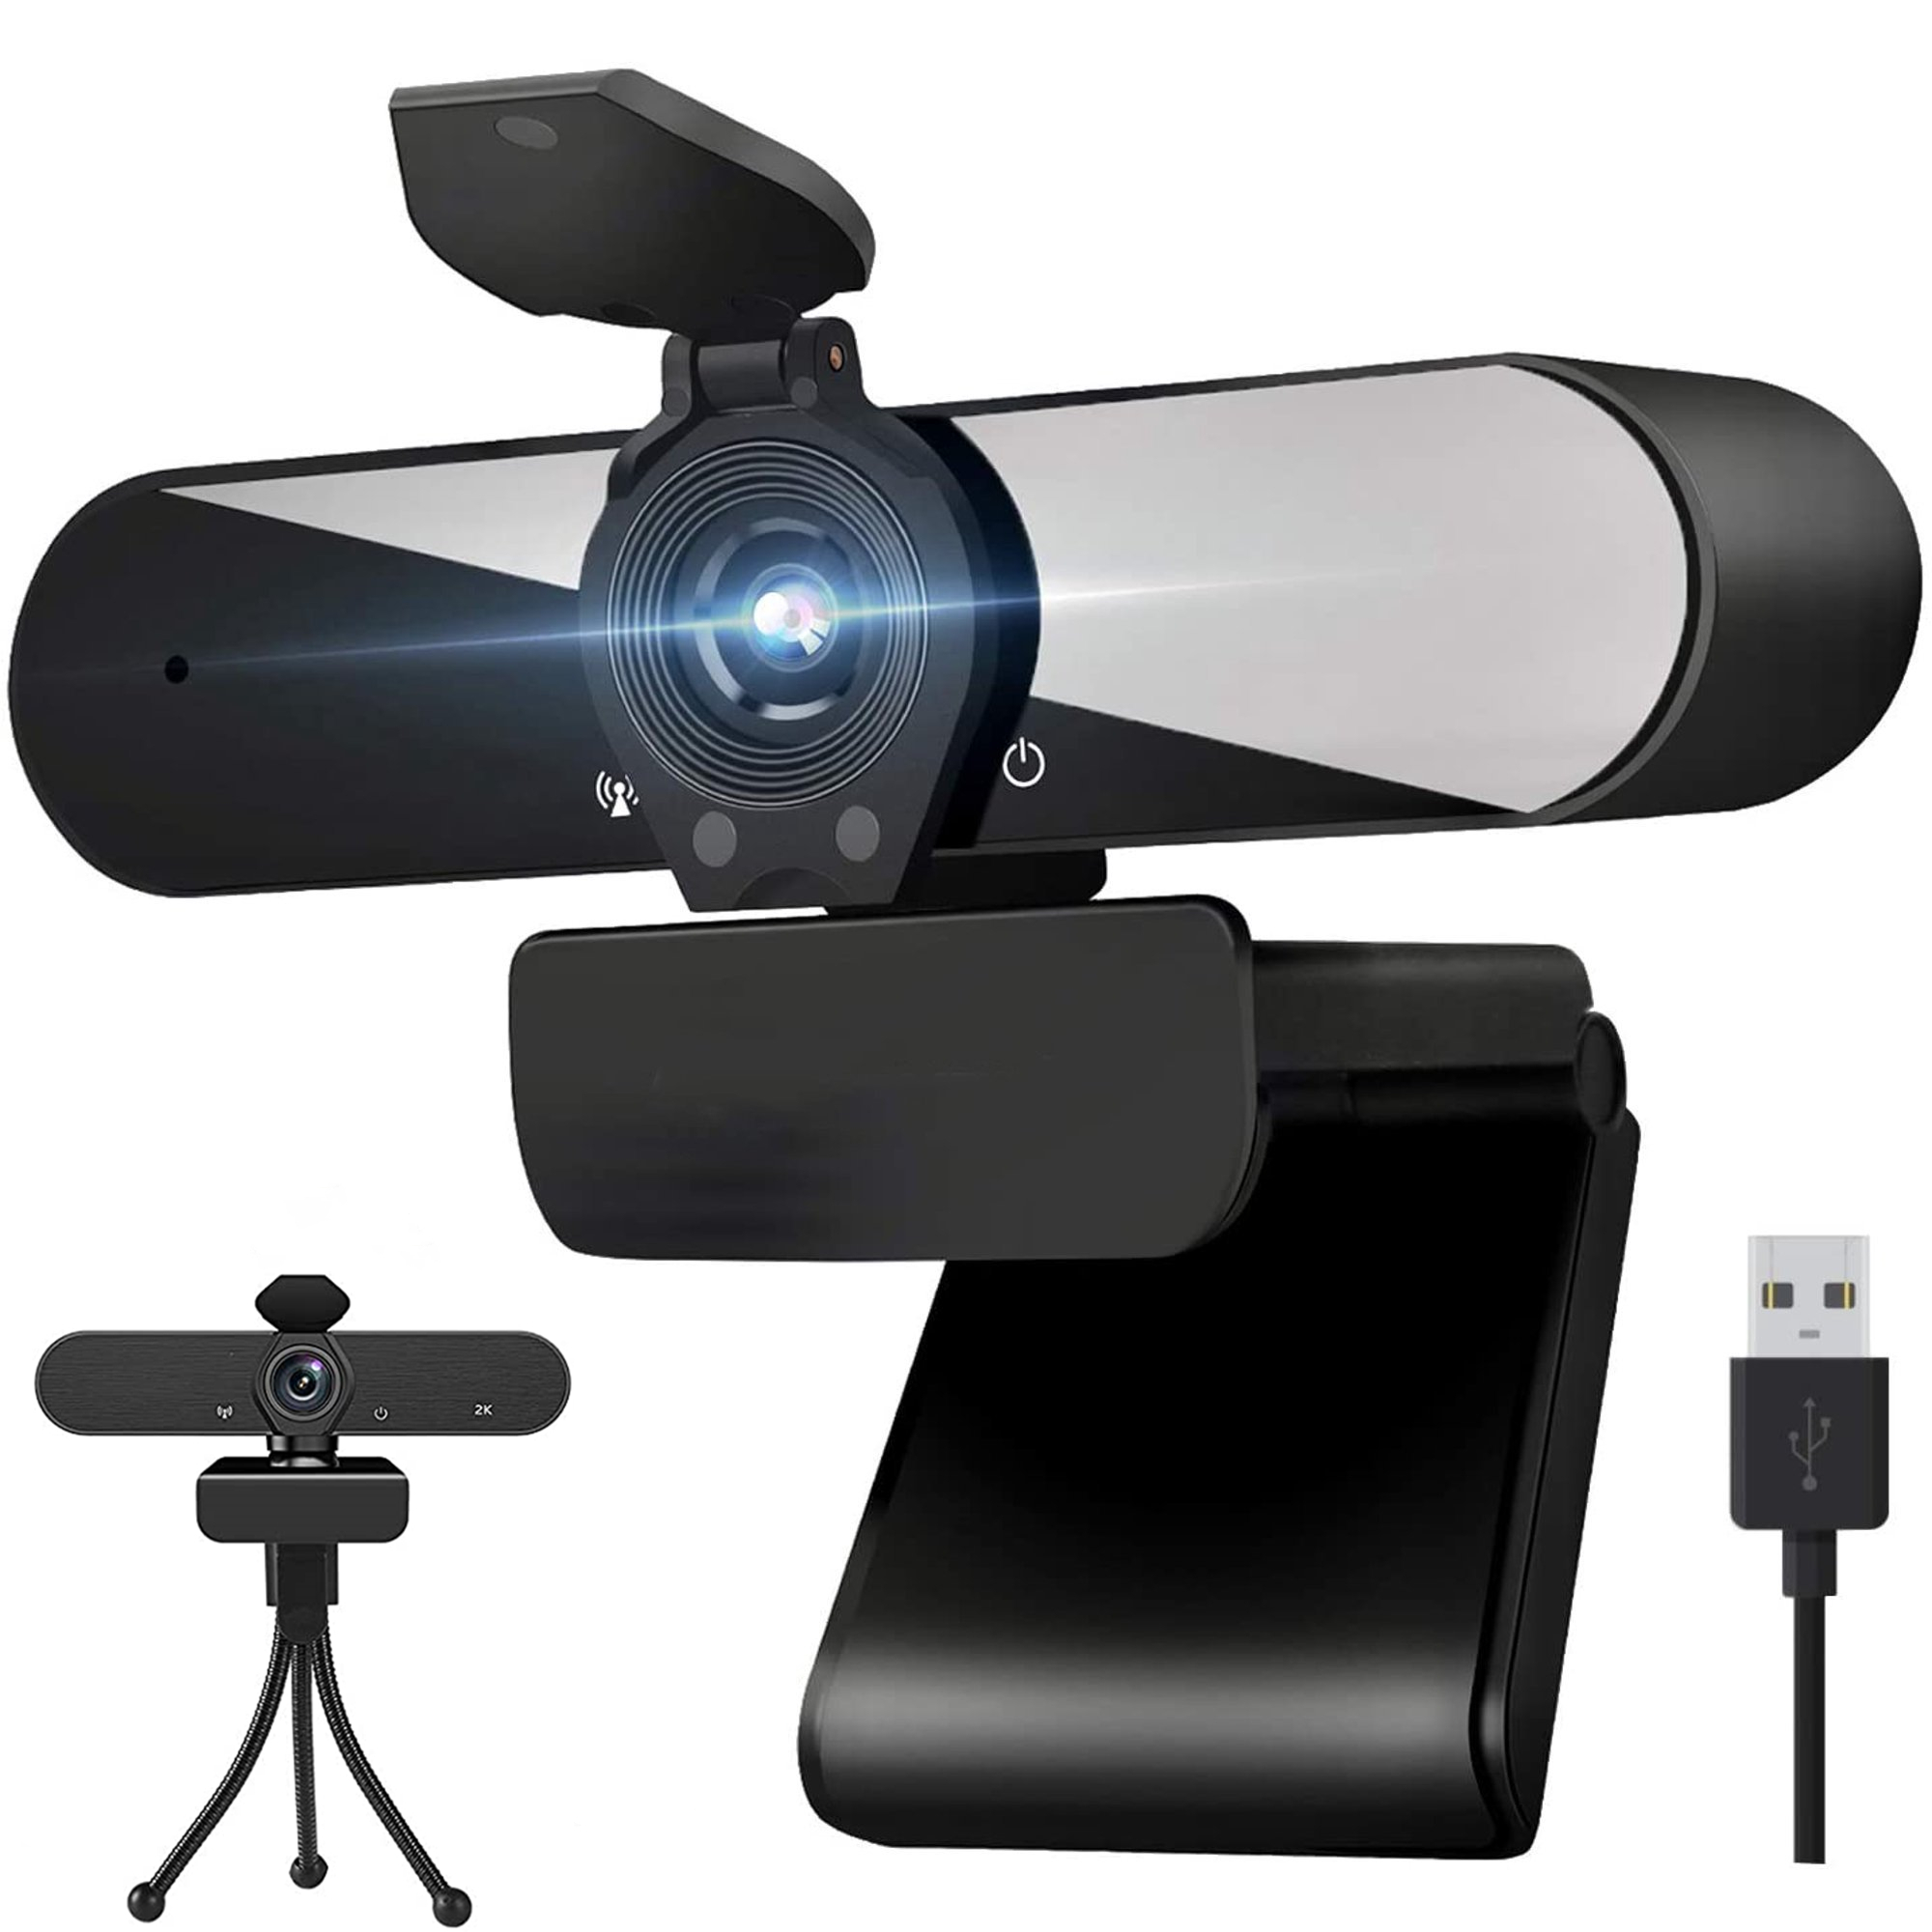 Webcam HD 1080p Web Camera, USB PC Computer Webcam with Microphone, Laptop Desktop Full HD Camera Video Webcam 360 Degree Widescreen, Pro Streaming Webcam for Recording, Calling, Conferencing, Gaming - image 1 of 8